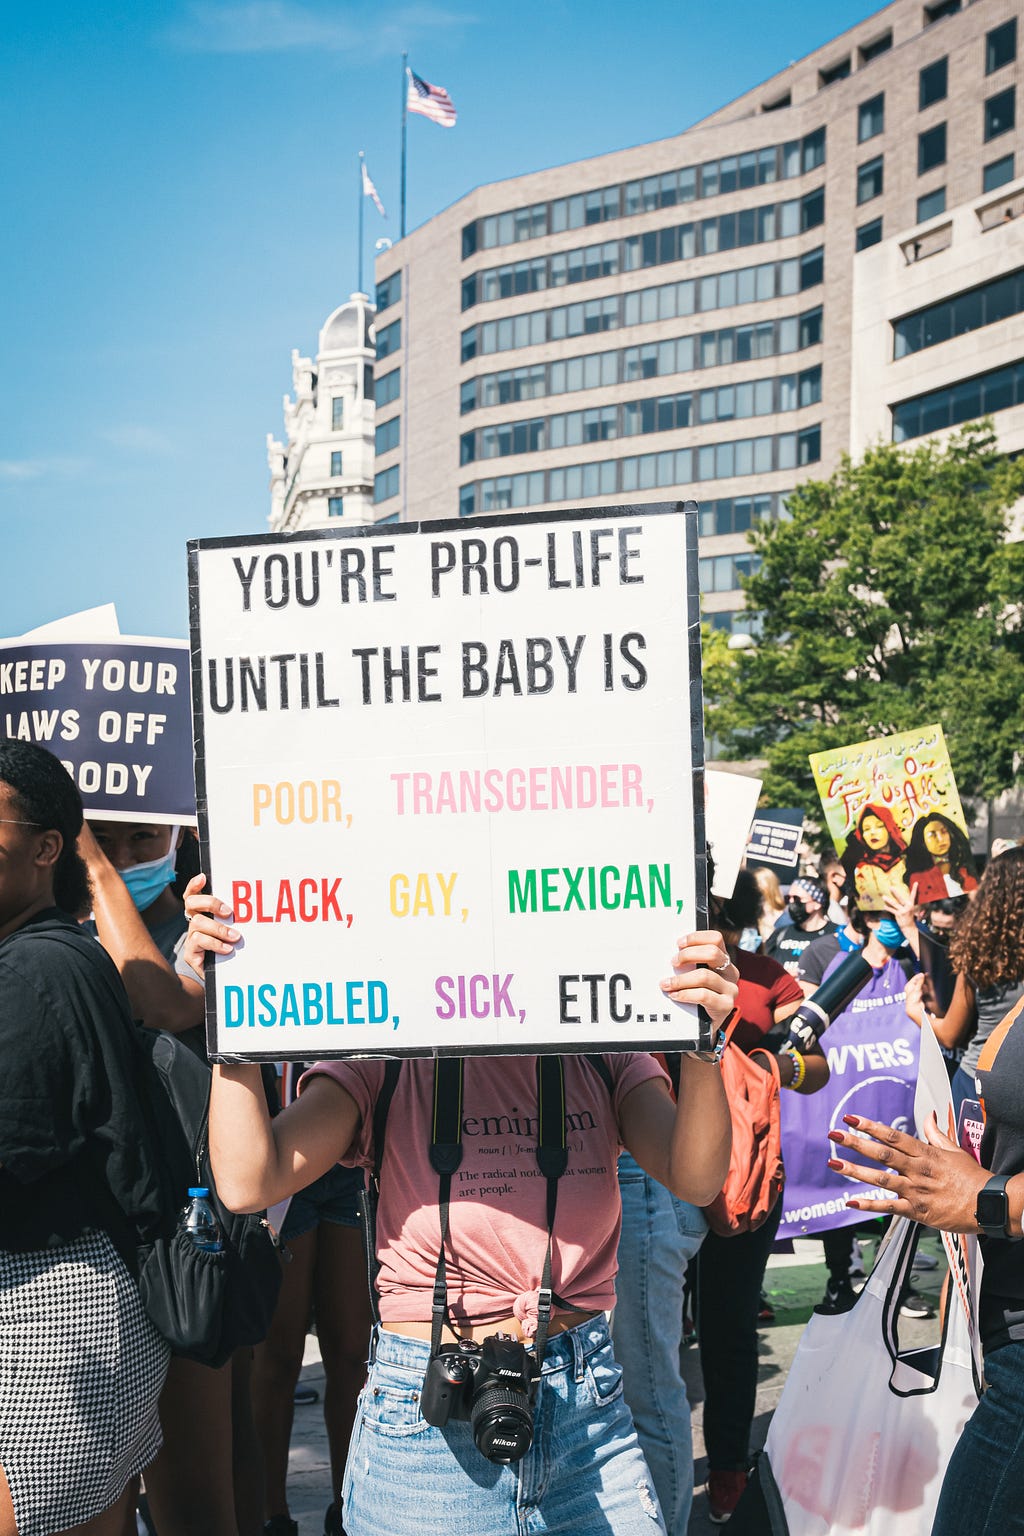 Protest photo sign that says, “You’re pro-life until the baby is poor, transgender, black, gay, Mexican, disabled, sick, etc.”